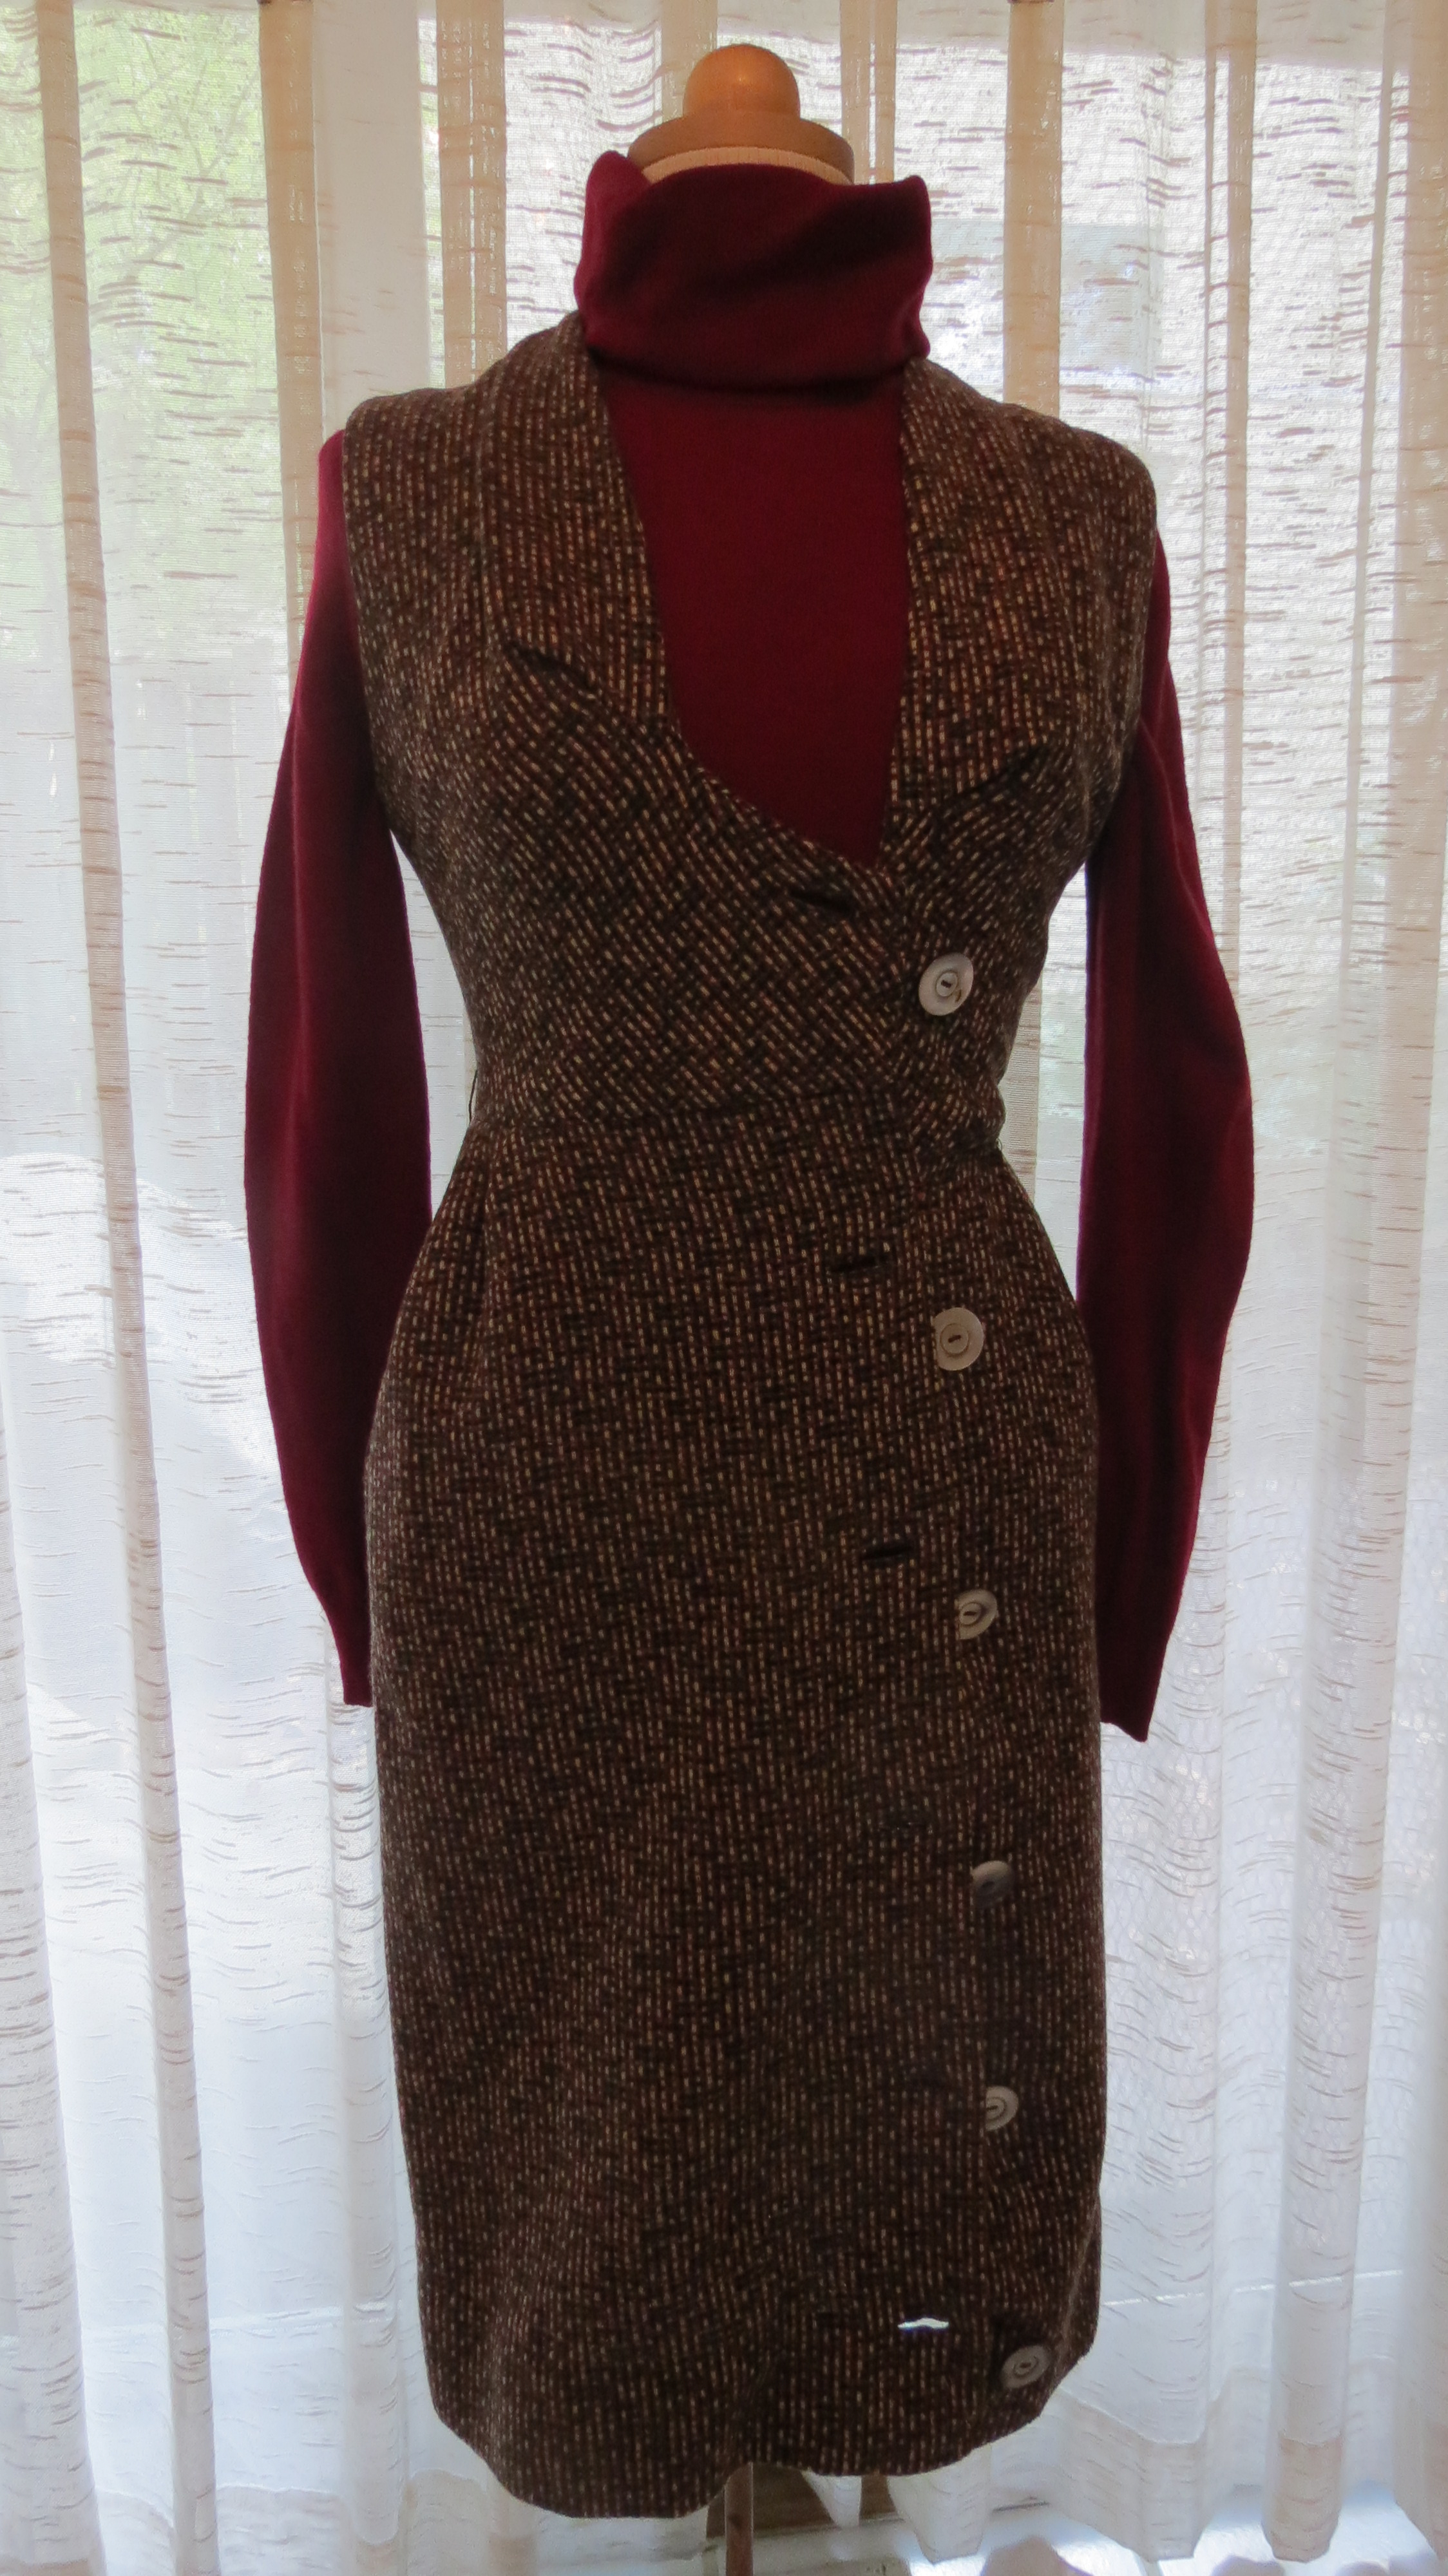 TRUE VINTAGE AMERICAN WOOL JUMPER DRESS FROM THE LATE '50'S OR EARLY '60'S